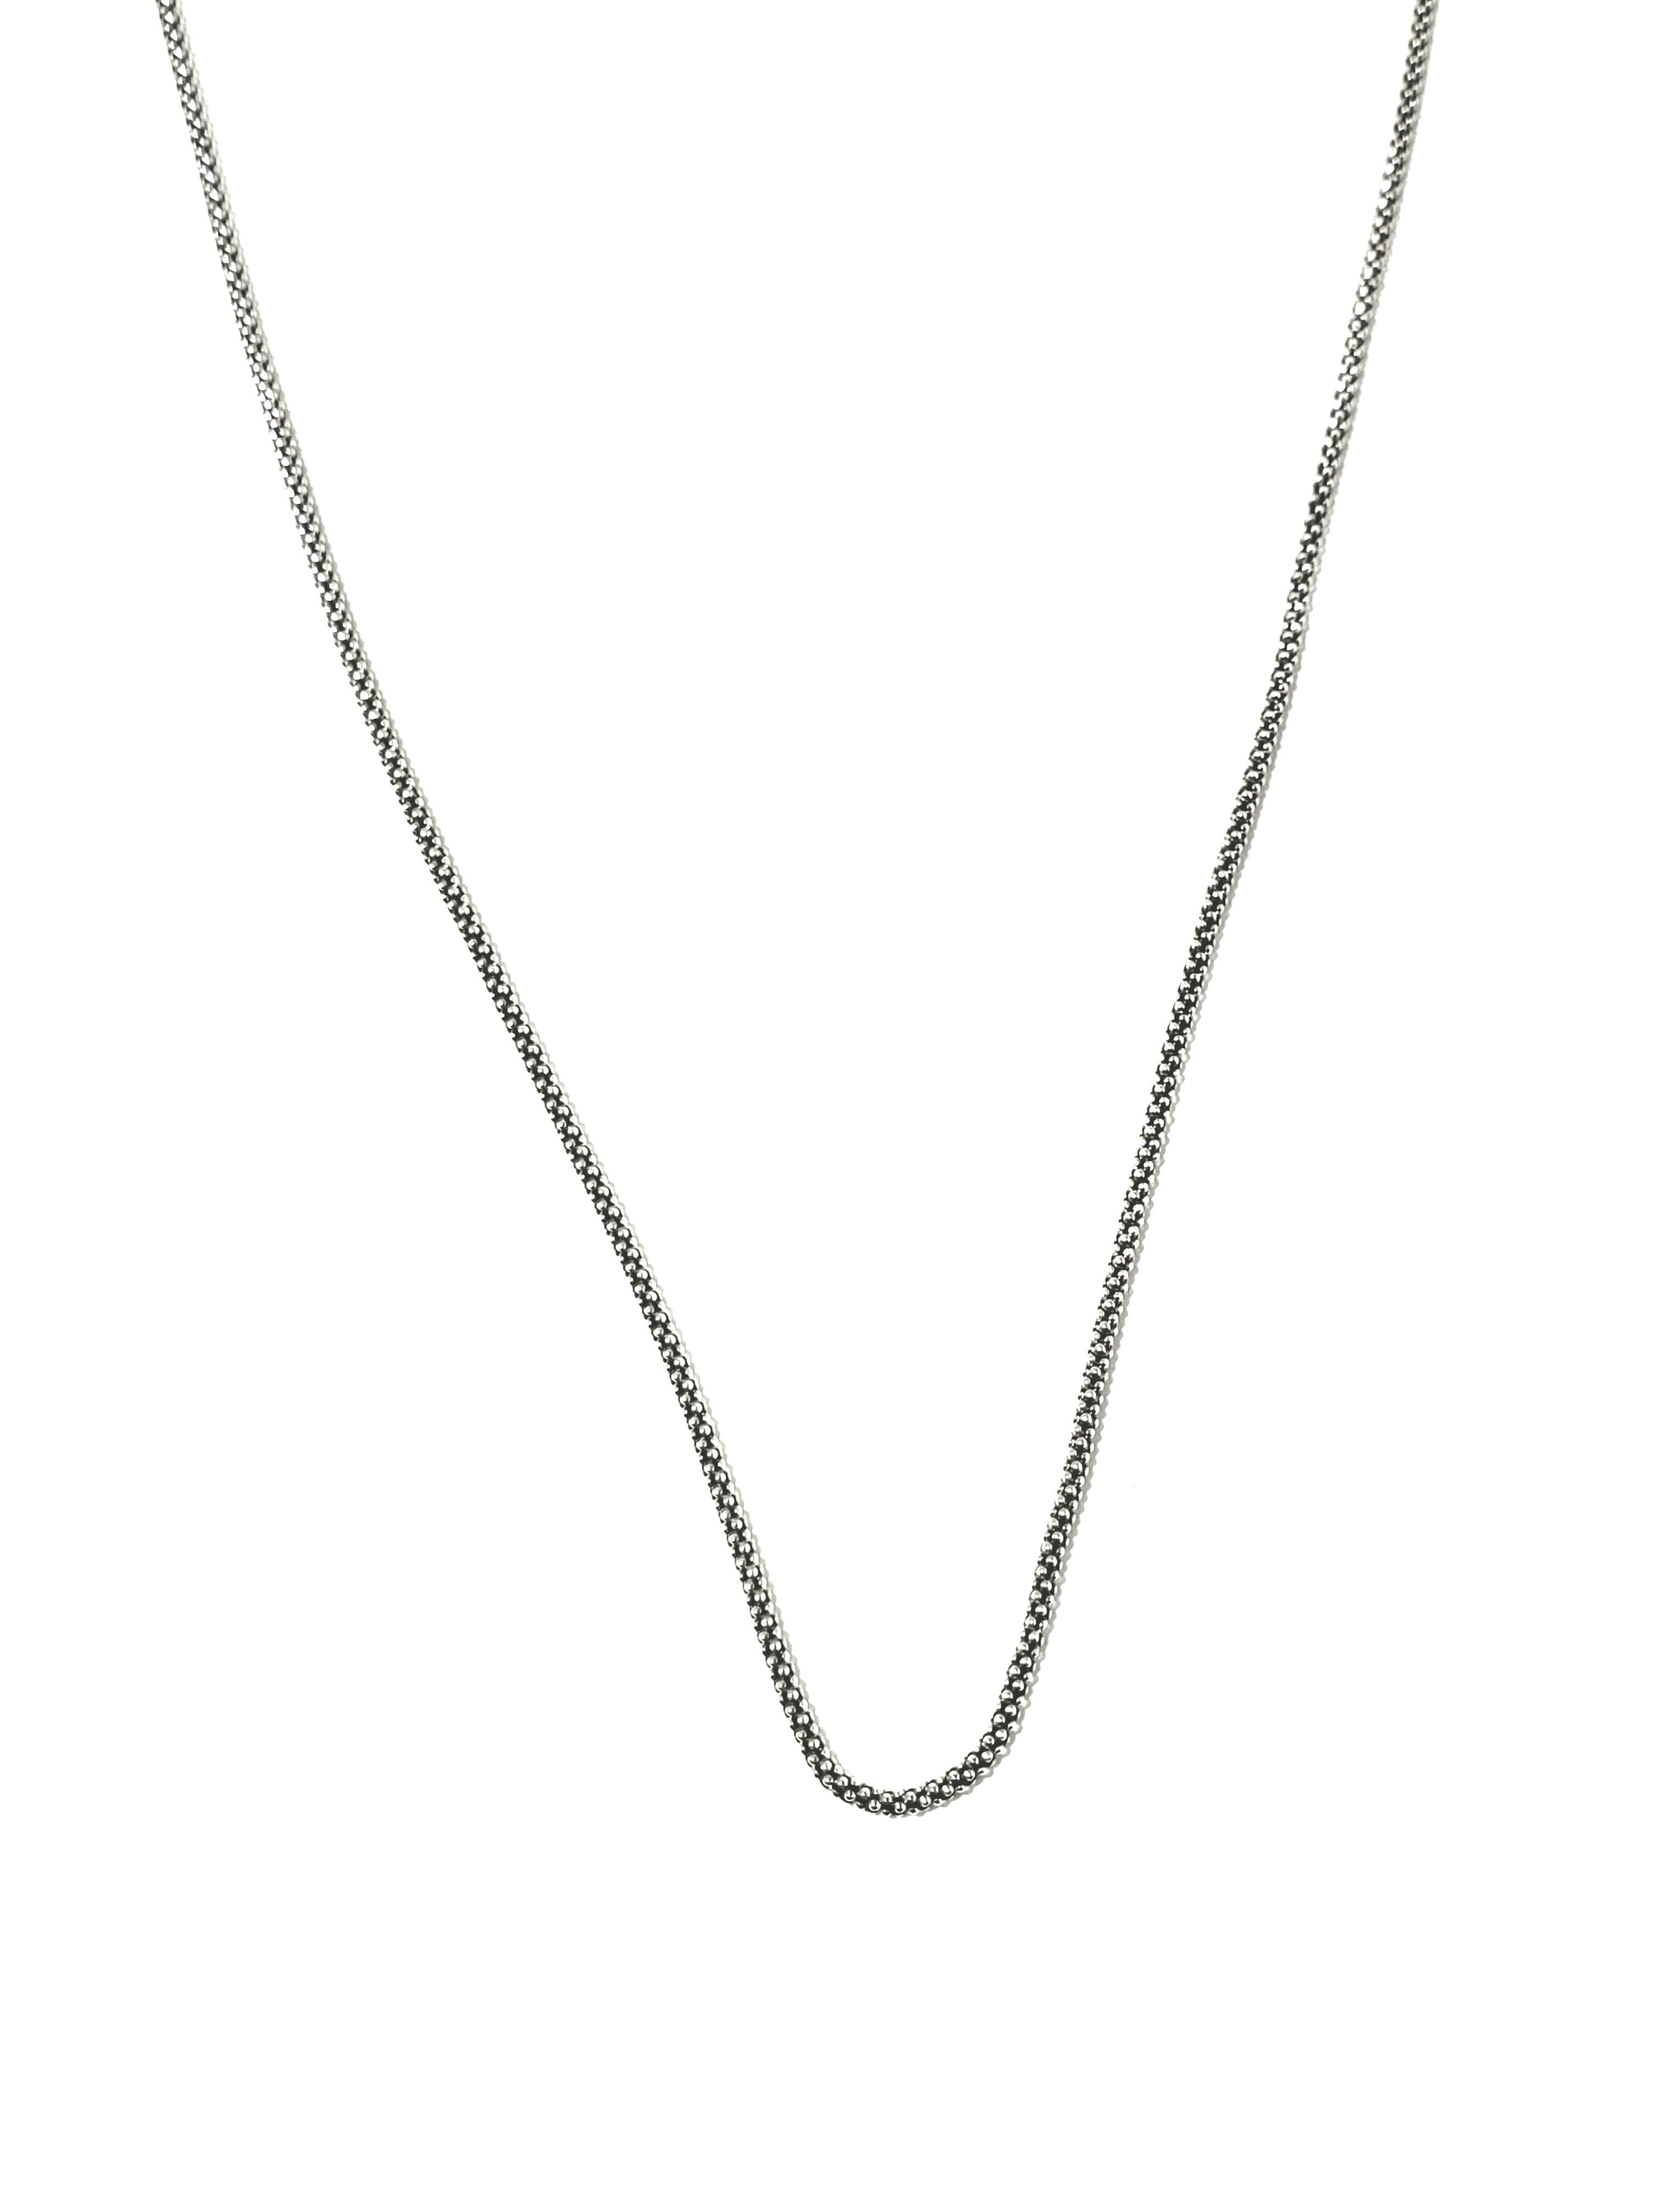 Samuel B BJC Sterling Silver Popcorn Chain Necklace

This is a lovely sterling silver popcorn chain necklace designed by Samuel B BJC. 

Measurements:     Measures 18 inches in length. 
 
Weight: 2.89 g /  1.8 dwt   

Condition: In good condition